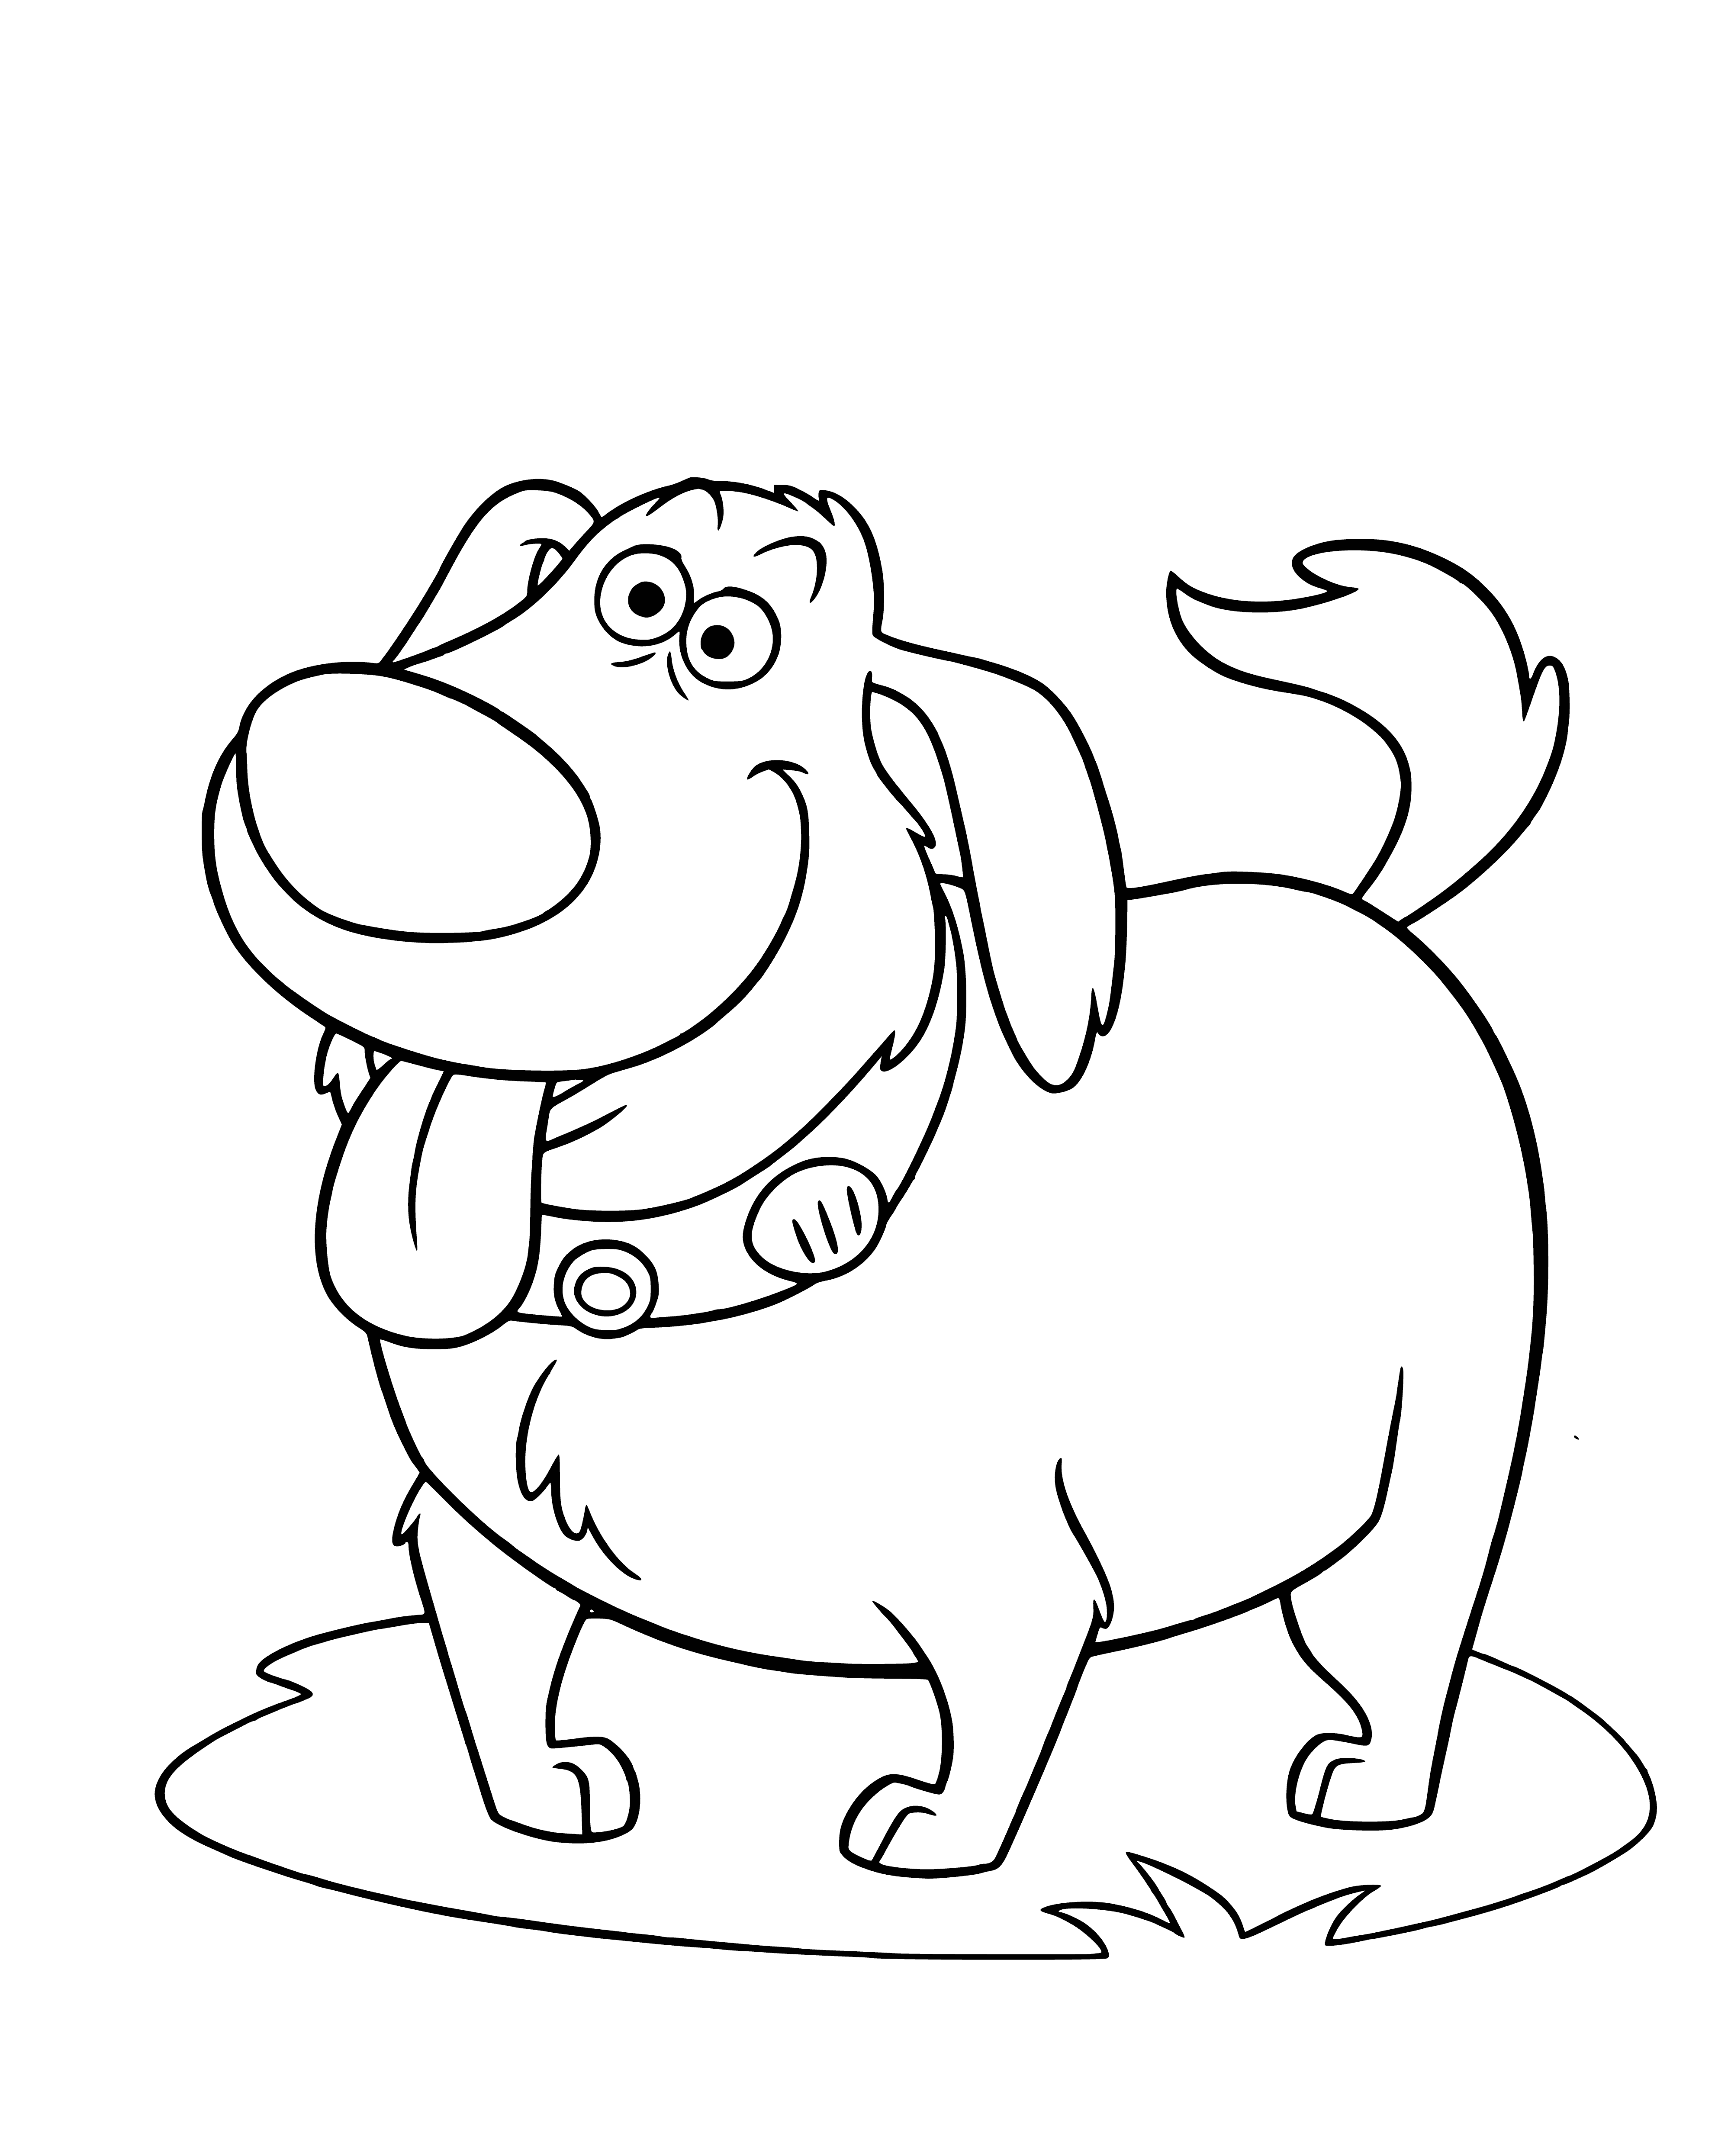 coloring page: Doug is a small, happy and excited white dog with big eyes and floppy ears. Sitting on hind legs, he looks off to the side.